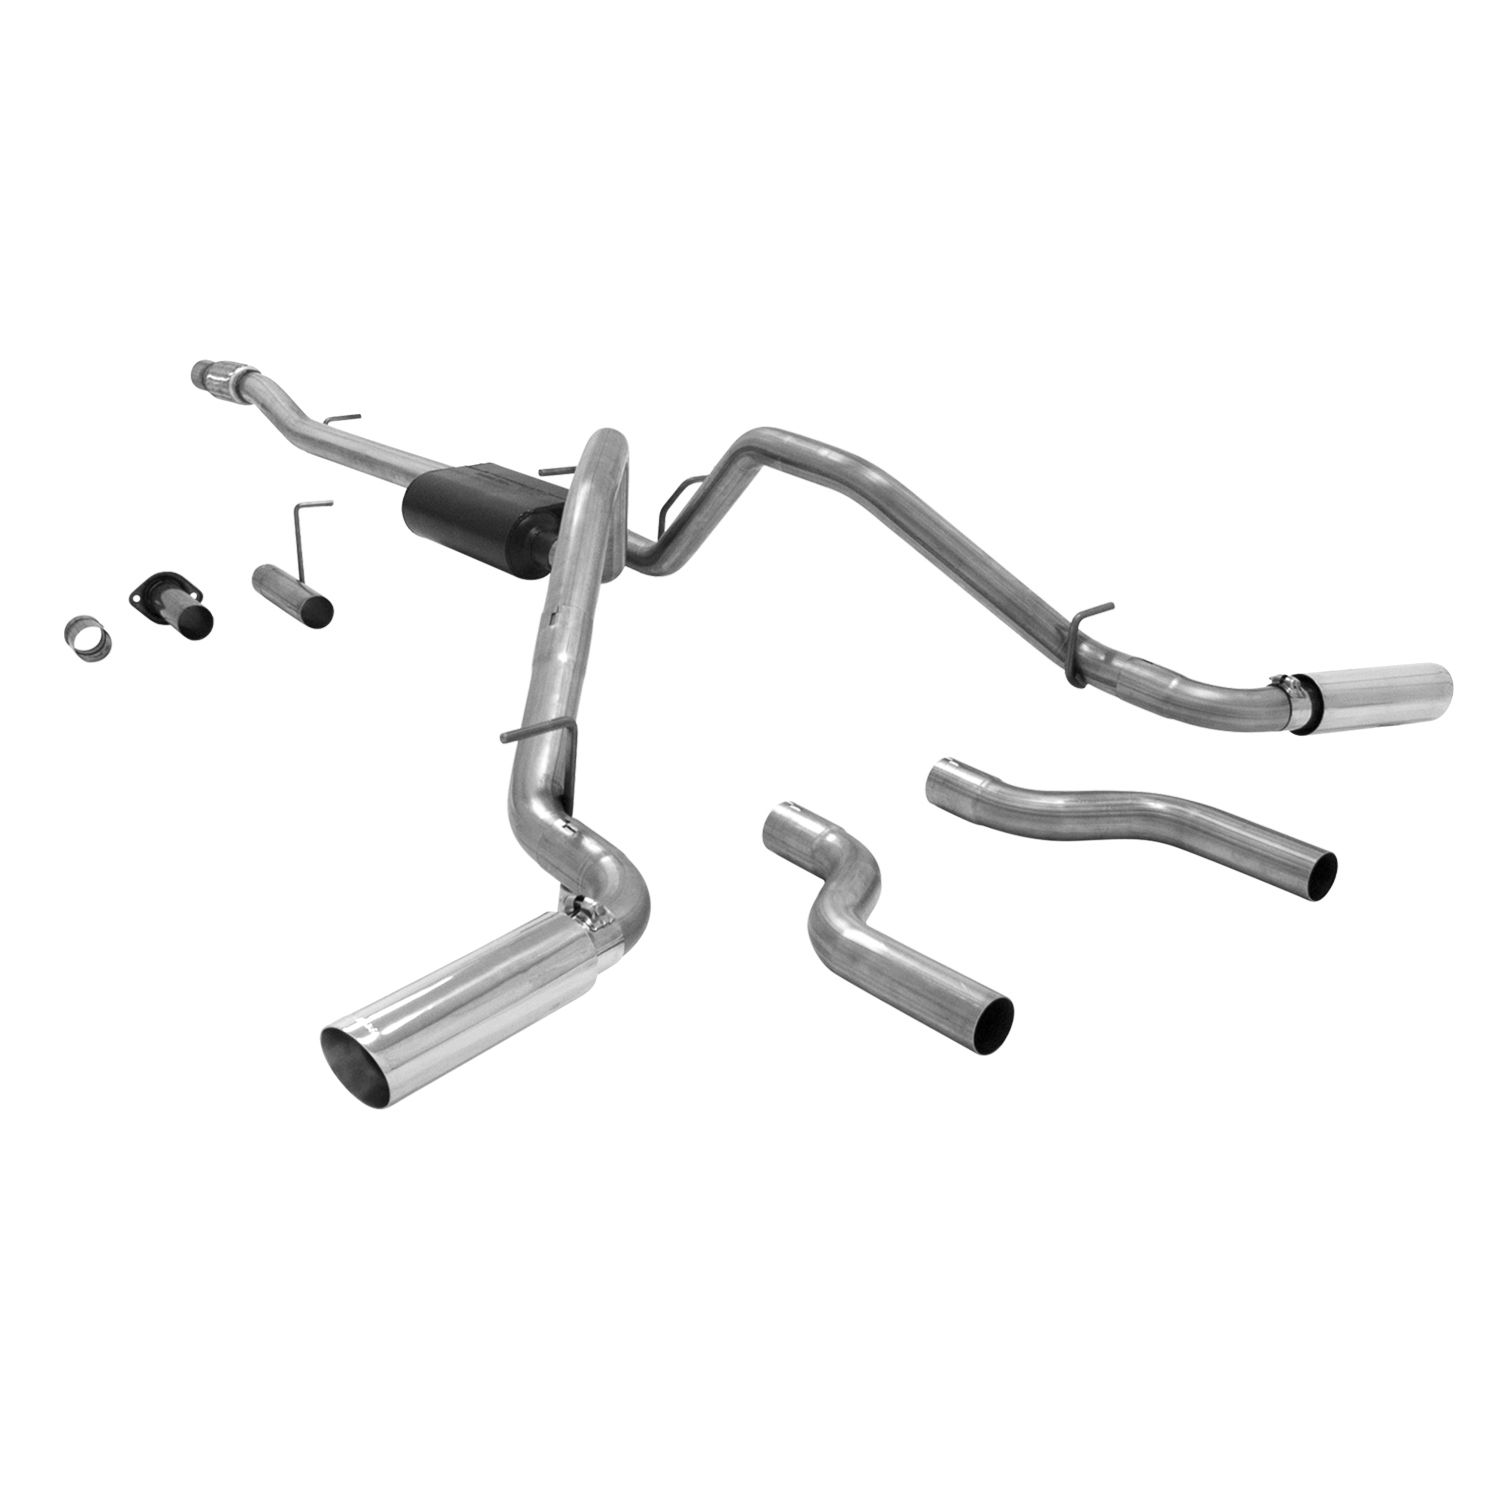 2007-2013 GMC Sierra 1500 5.3L 4DR Crew Cab/EXT Cab Flowmaster American Thunder Cat-Back Exhaust